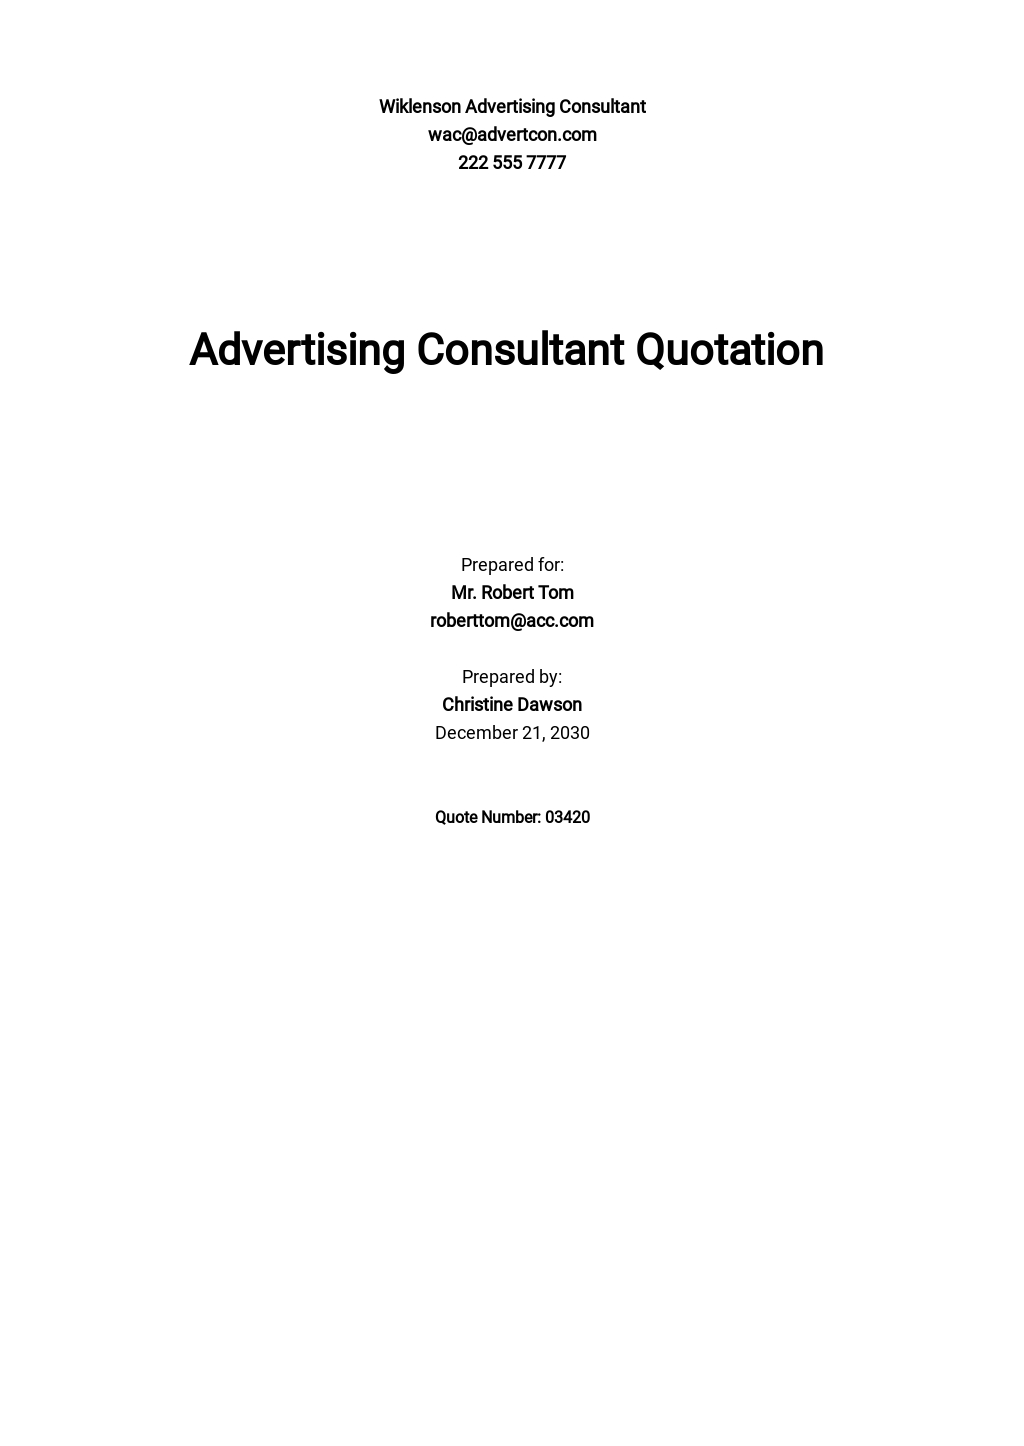 Advertising Consultant Quotation Template - Google Docs, Google Sheets, Excel, Word